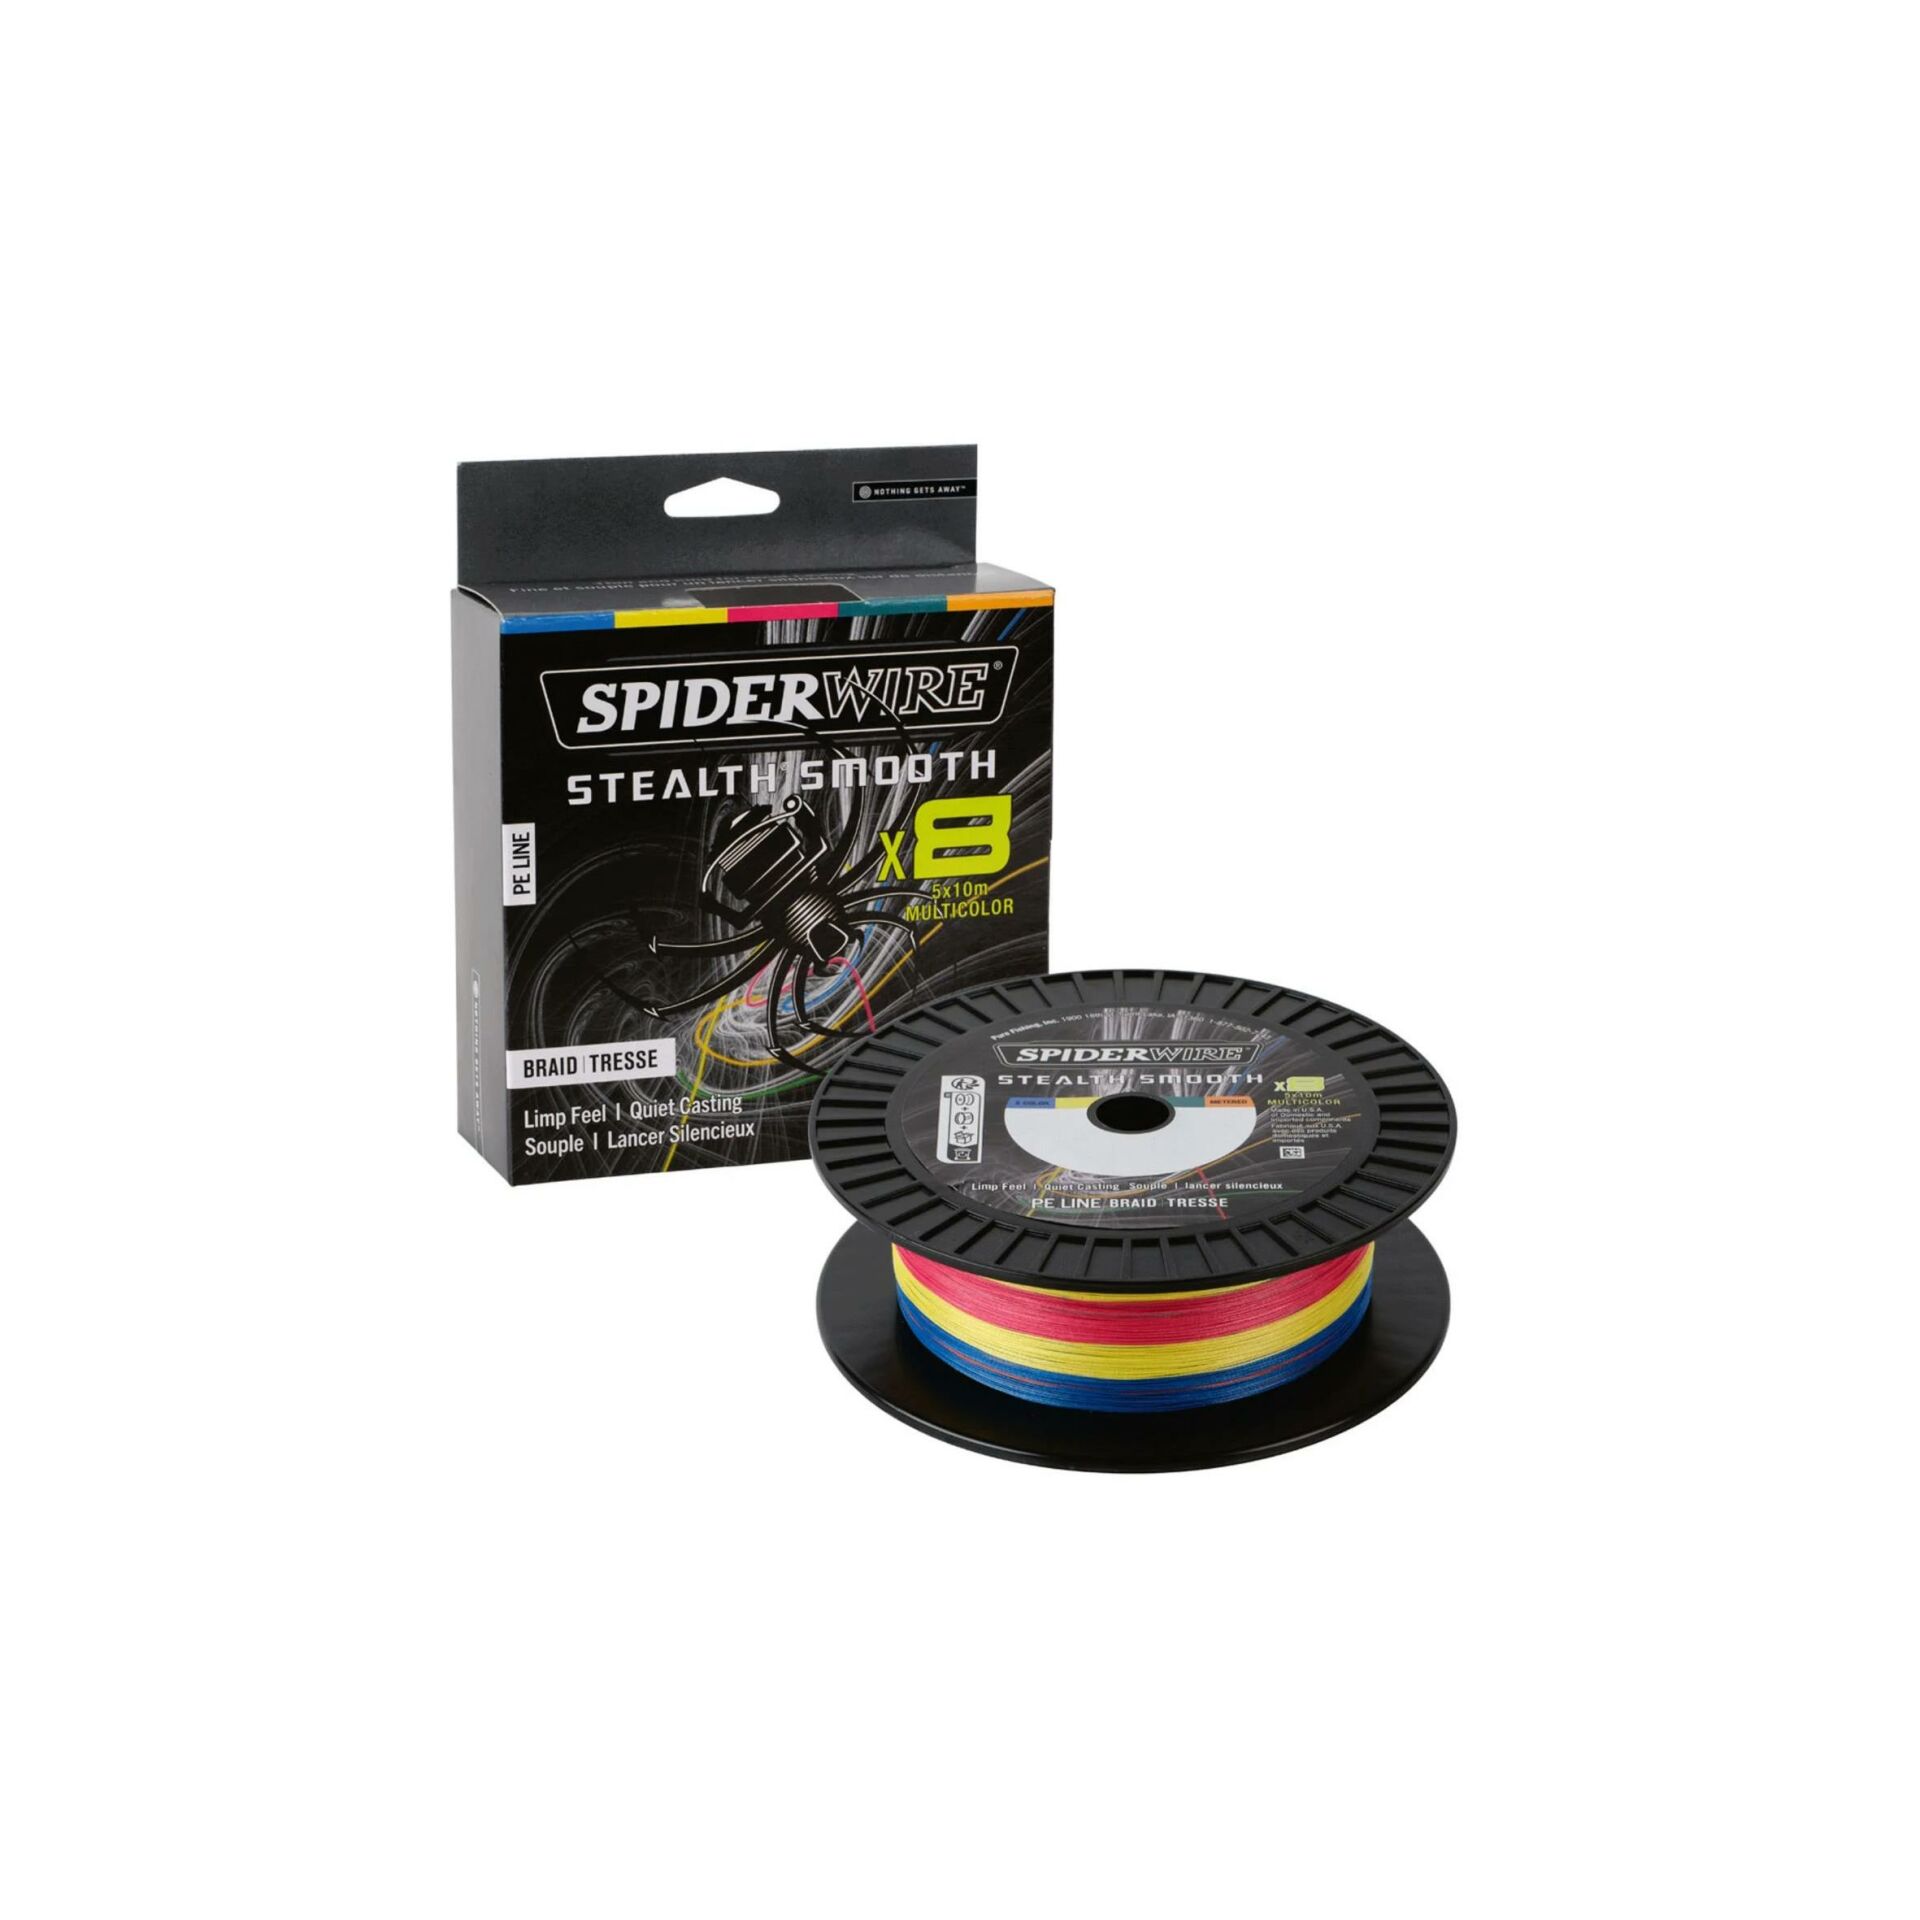 Spider Wire Stealth Smooth x8 300 m Multicolour 0.39mm